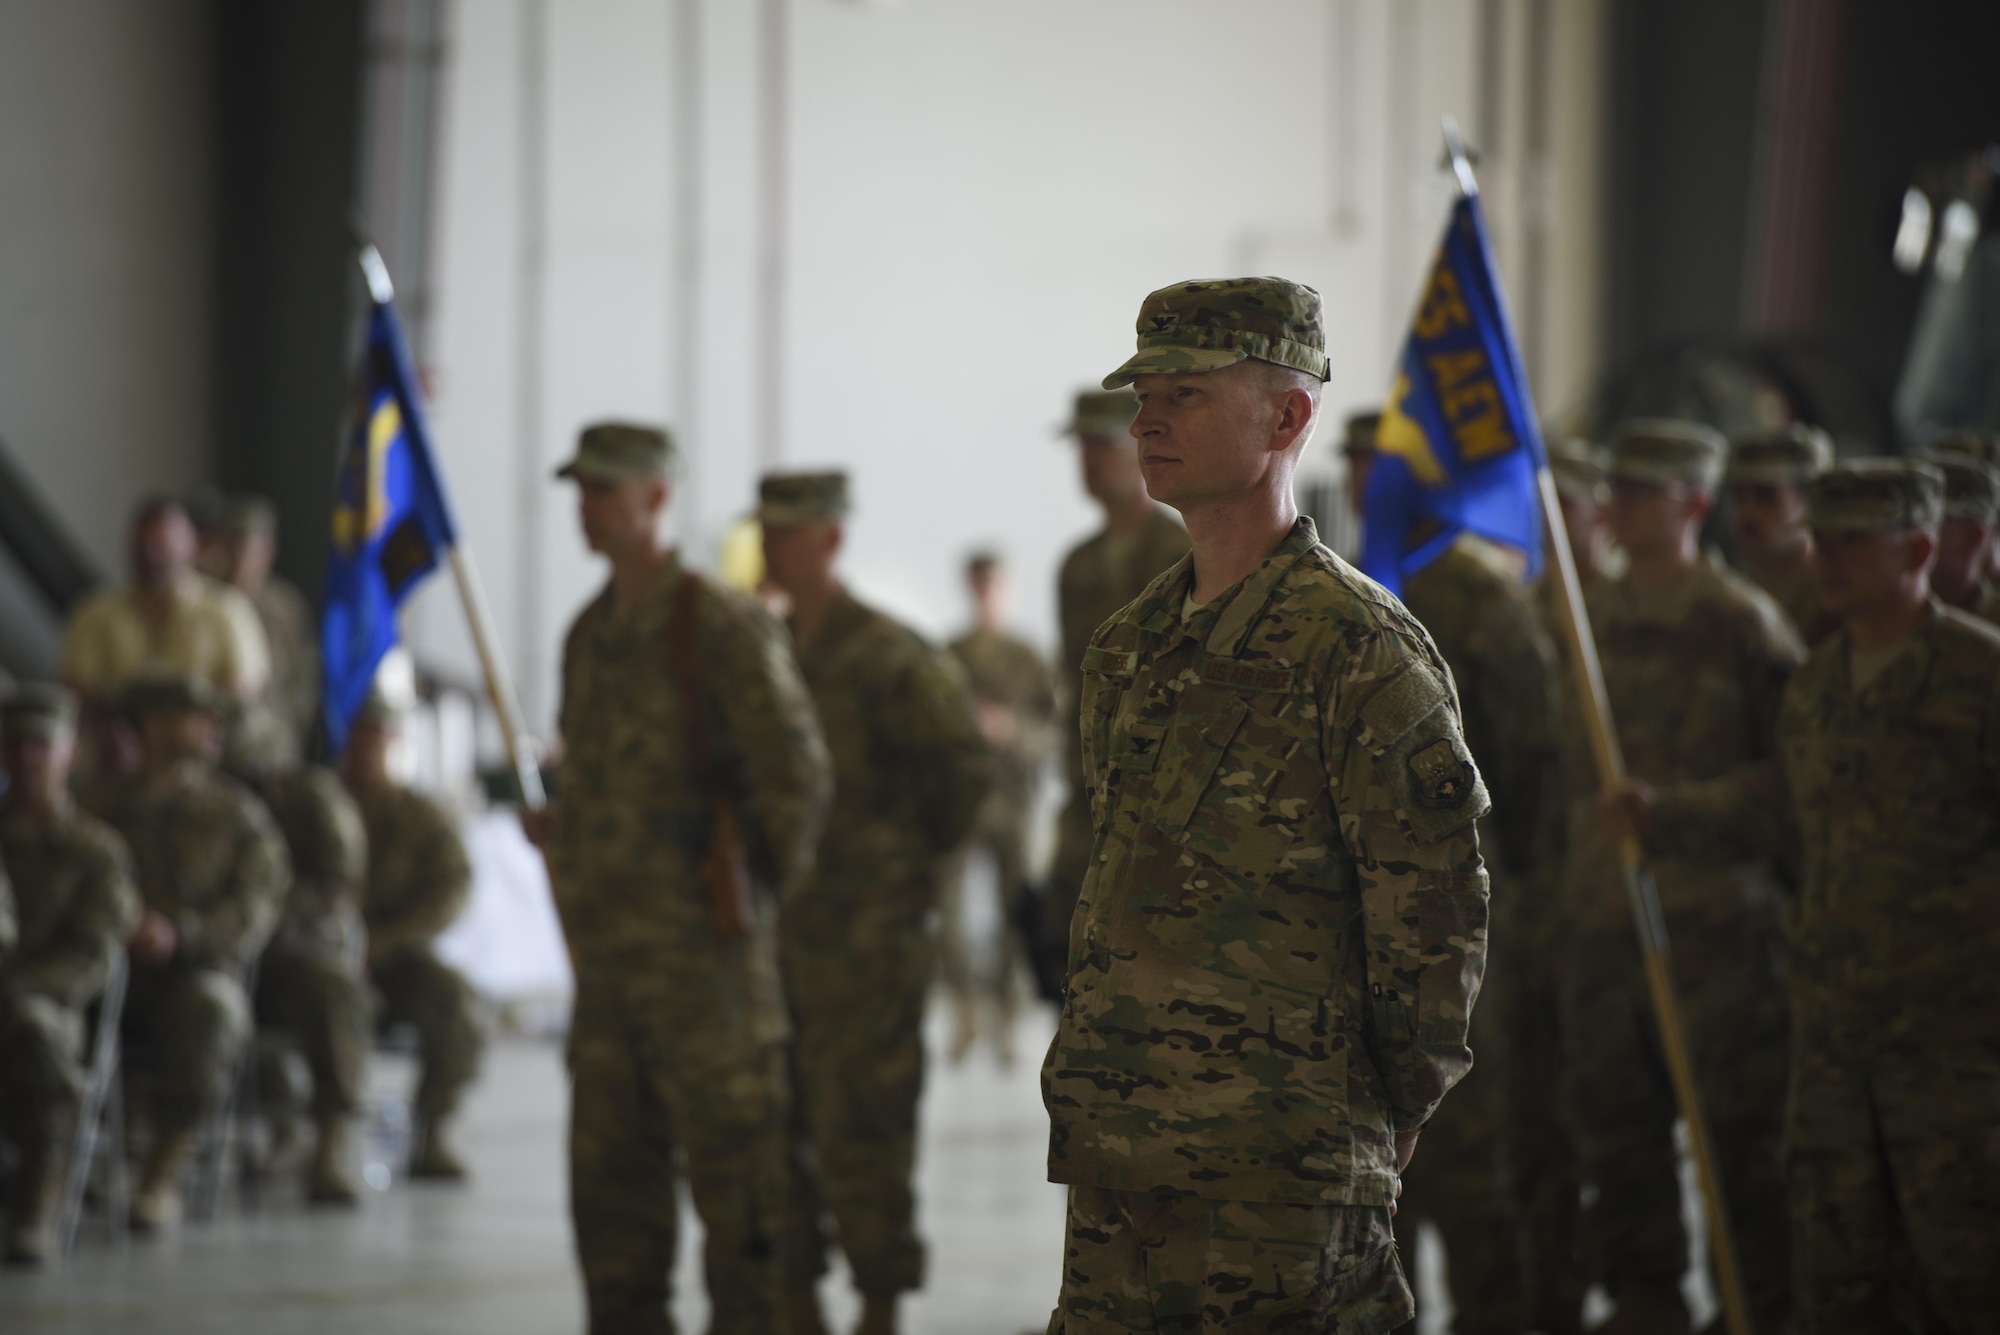 Col. William Burks, the 455th Air Expeditionary Wing vice commander, stands in formation during a change of command ceremony at Bagram Airfield, Afghanistan, June 3, 2017. Bagram Airfield welcomed its new commander, Brig. Gen. Craig Baker. (U.S. Air Force photo by Staff Sgt. Benjamin Gonsier) 